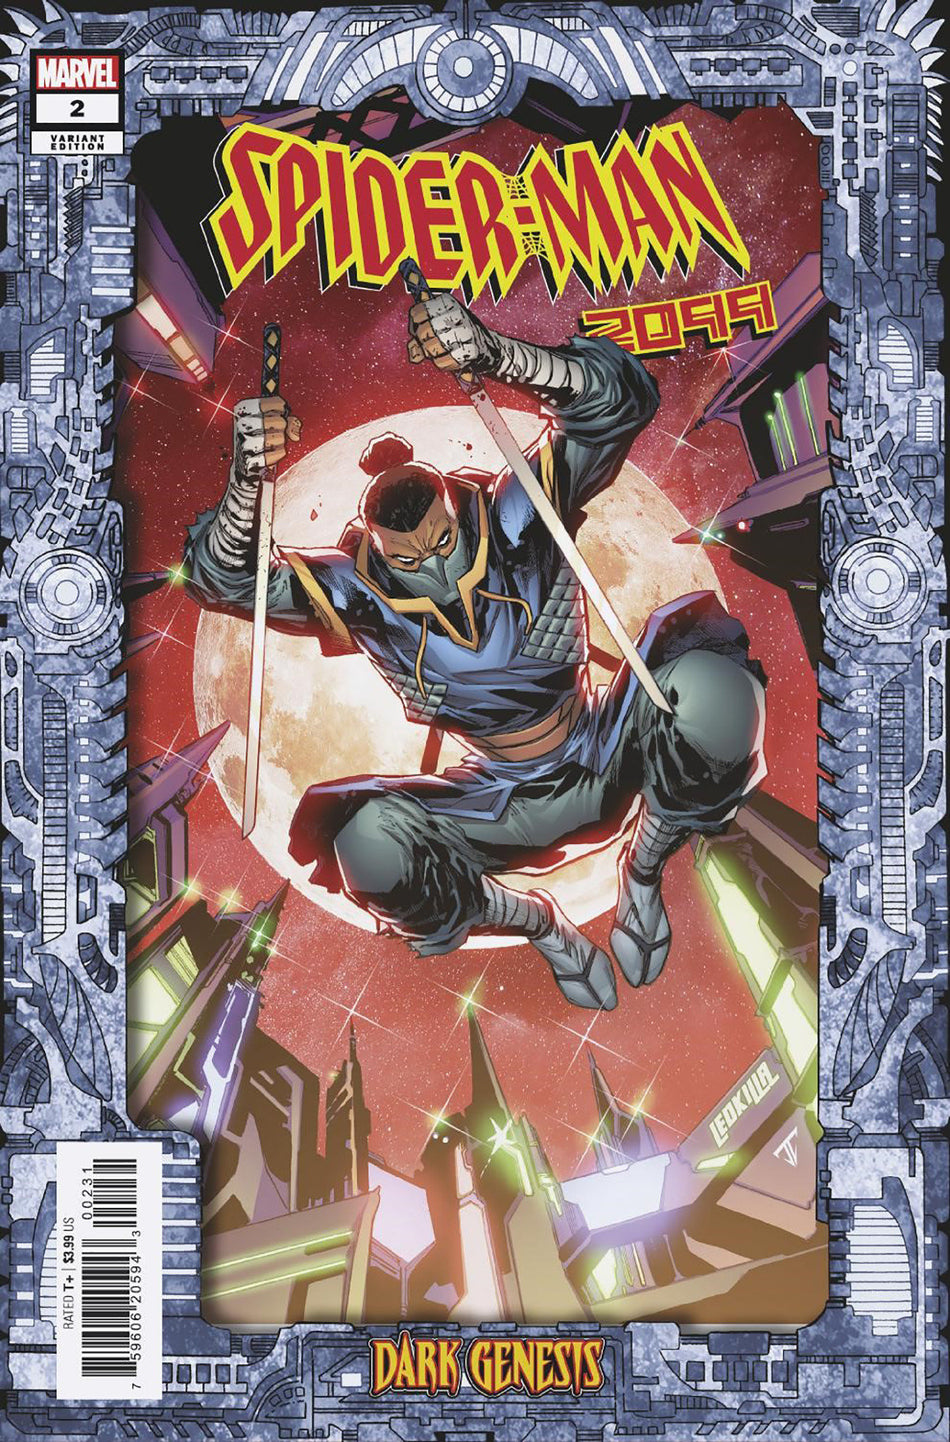 Stock Photo of Spider-Man 2099: Dark Genesis 2 Ken Lashley Frame Variant comic sold by Stronghold Collectibles